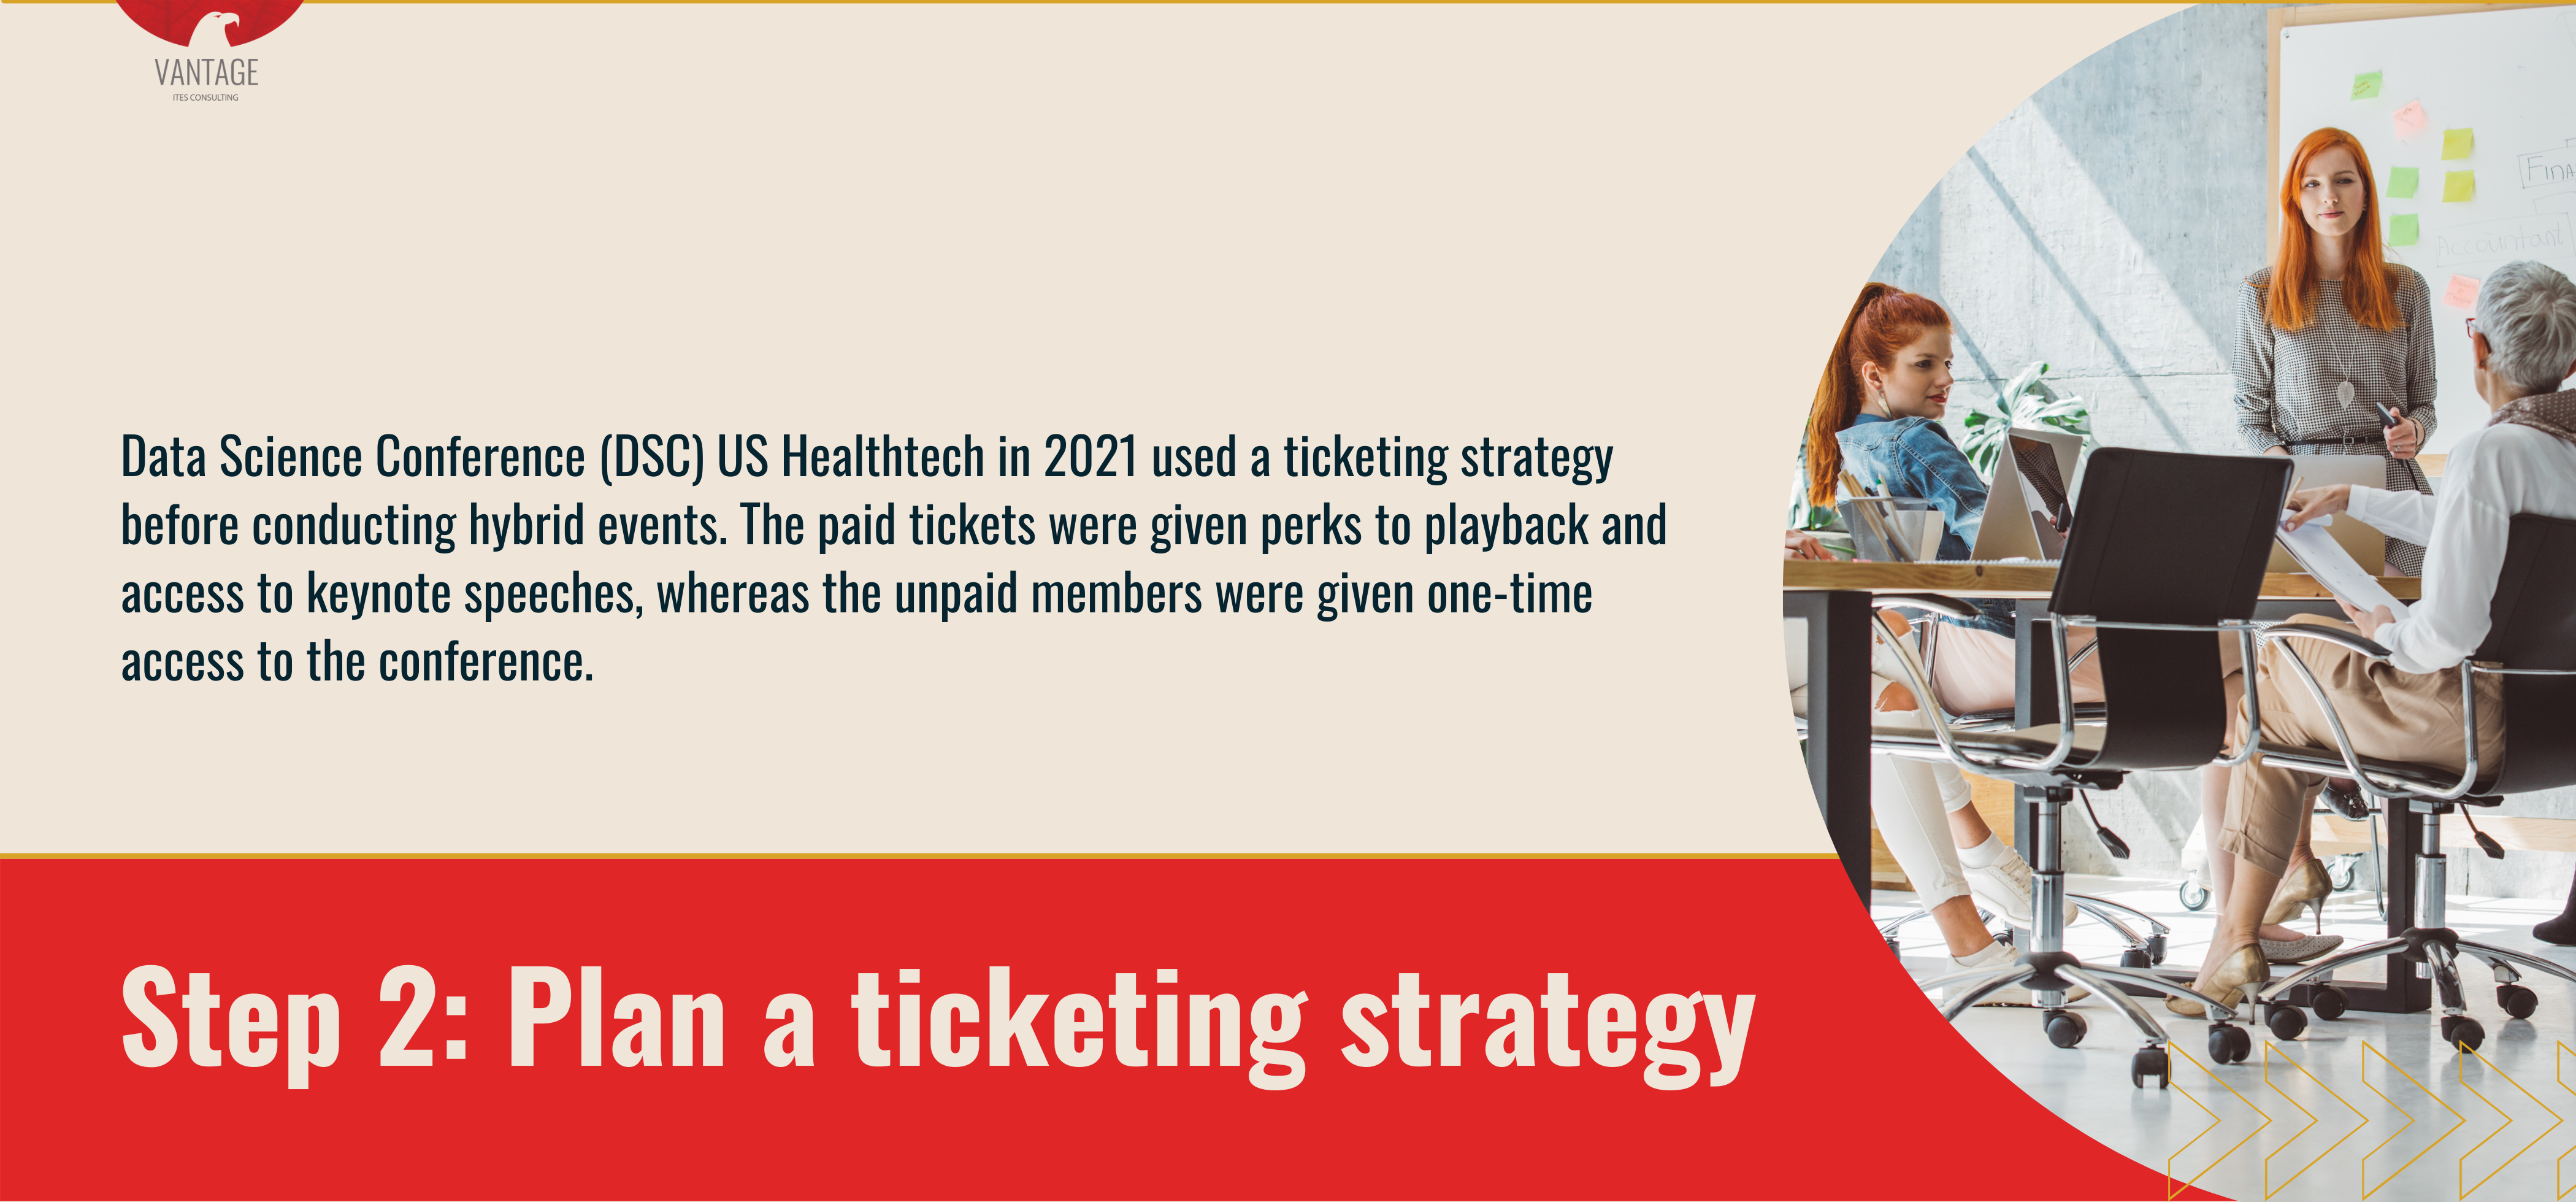 plan ticketing strategy for virtual events